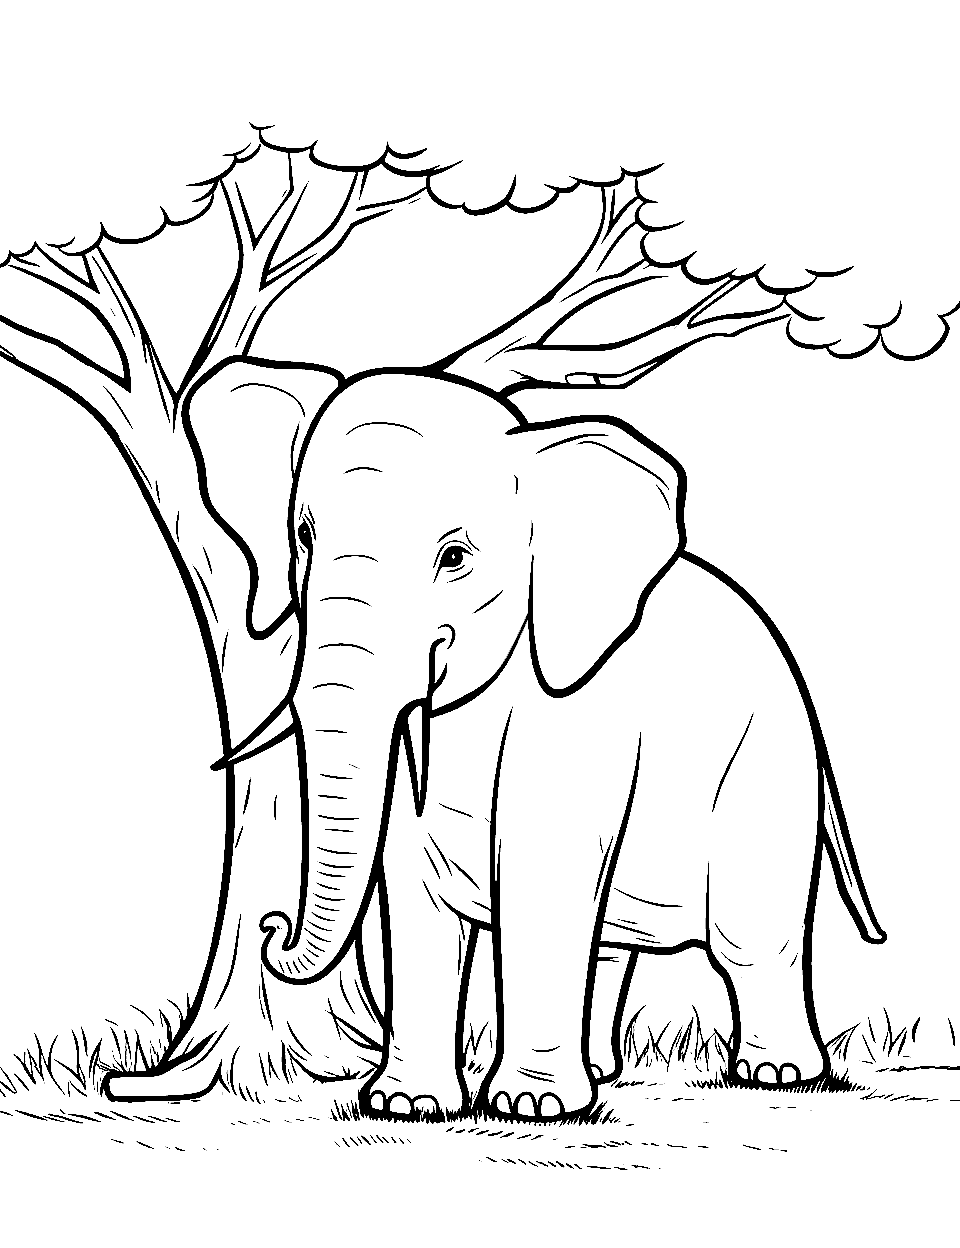 Elephant Near a Tree Coloring Page - An elephant resting under a tree, enjoying its shade.